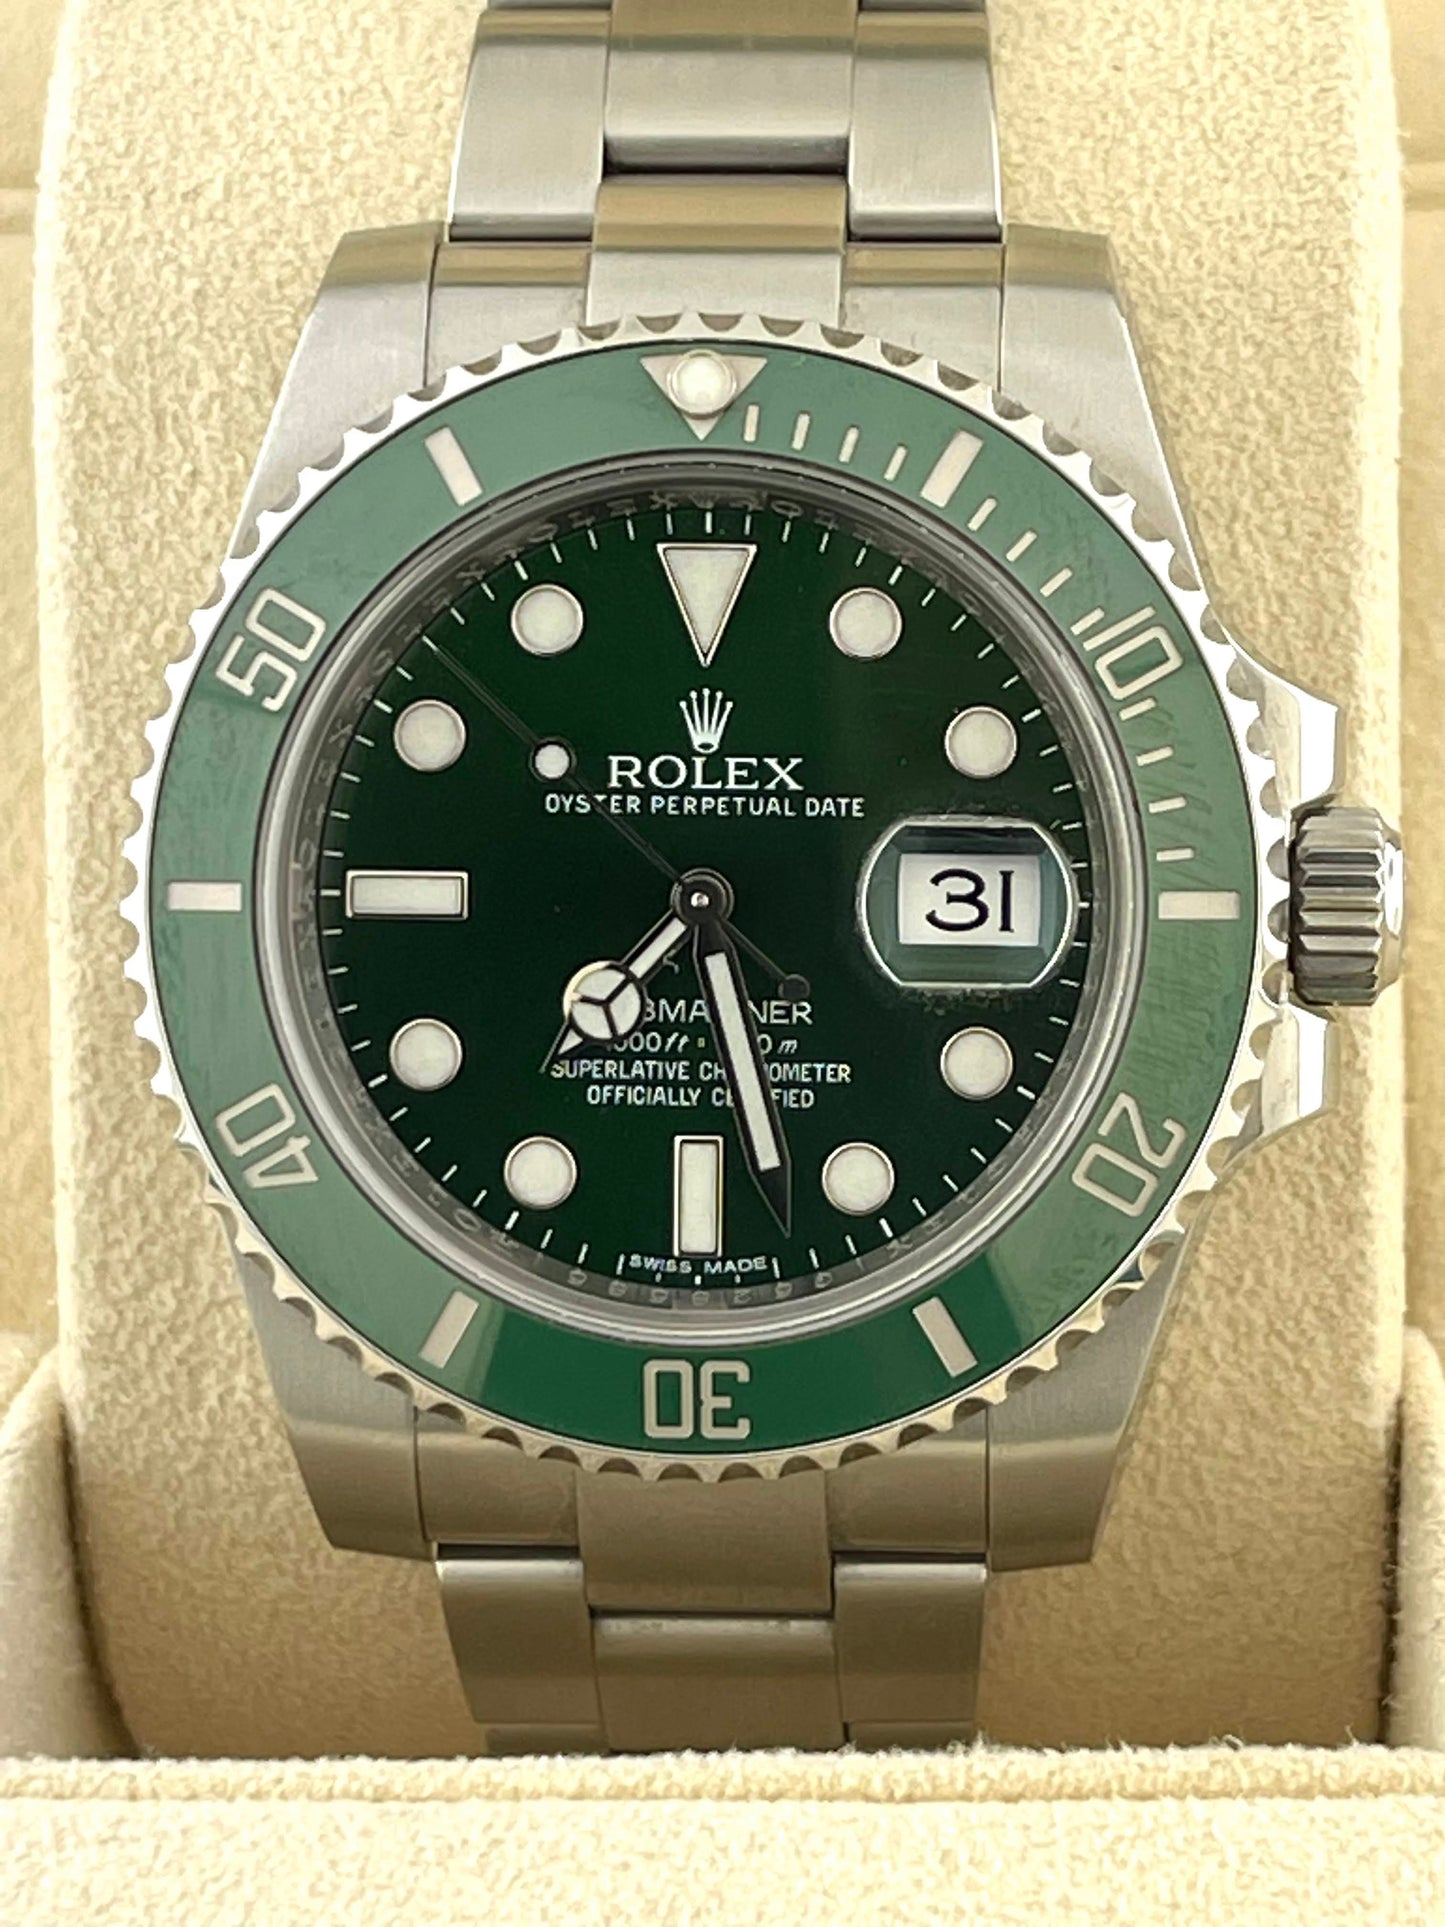 2013 Rolex Submariner 116610LV Hulk Green Dial With Box + Papers 40mm